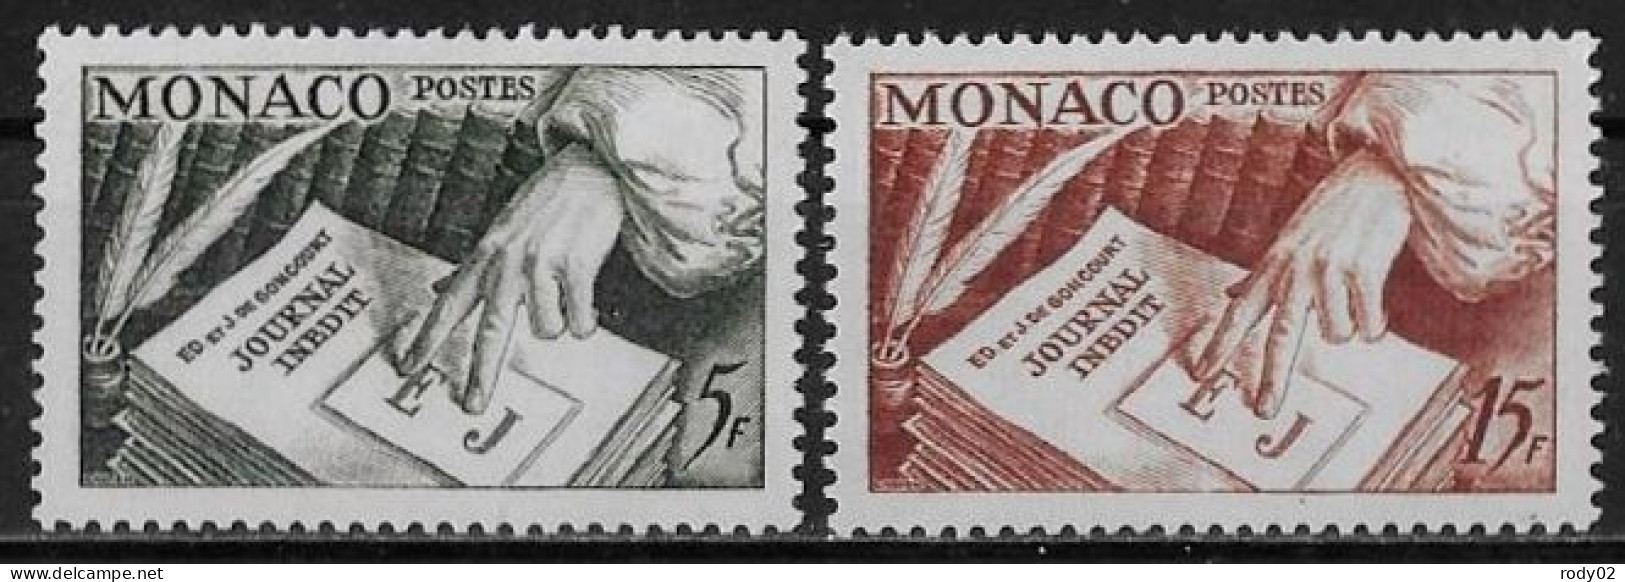 MONACO - JOURNAL INEDIT DES FRERES GONCOURT - N° 392 ET 393 - NEUF** MNH - Unused Stamps